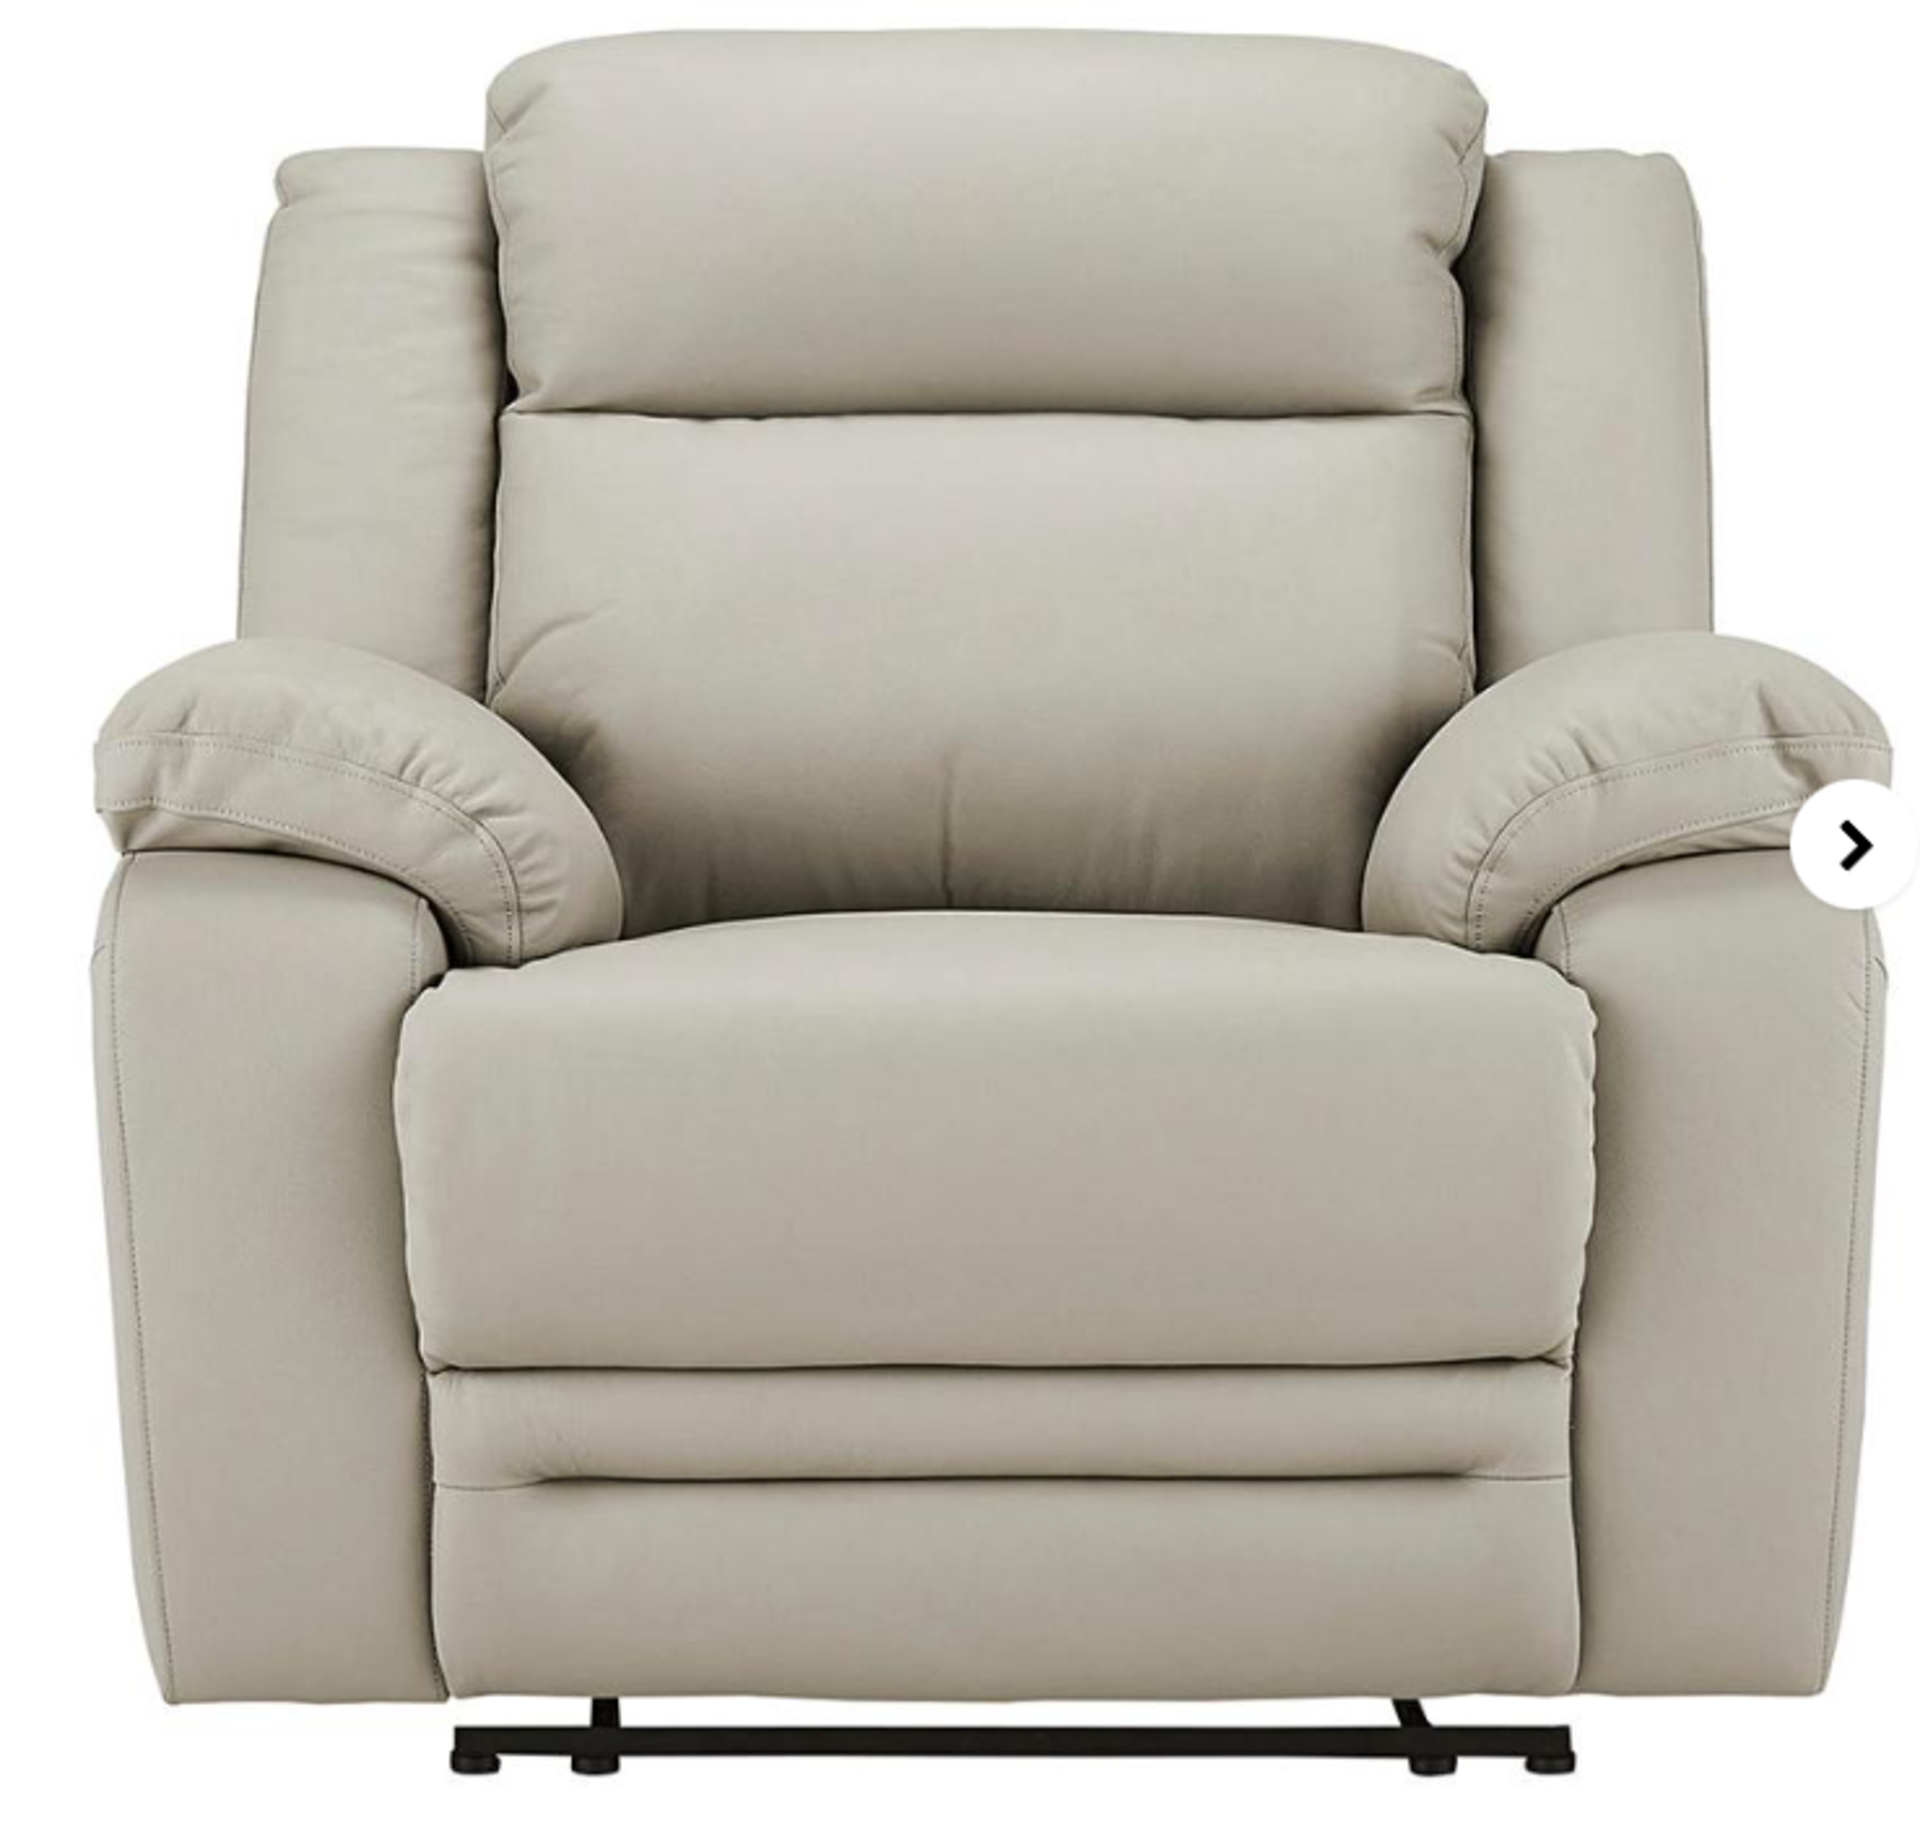 Croft Leather Recliner Chair - ER23. RRP £599.00. modern reclining suite combining sumptuous comfort